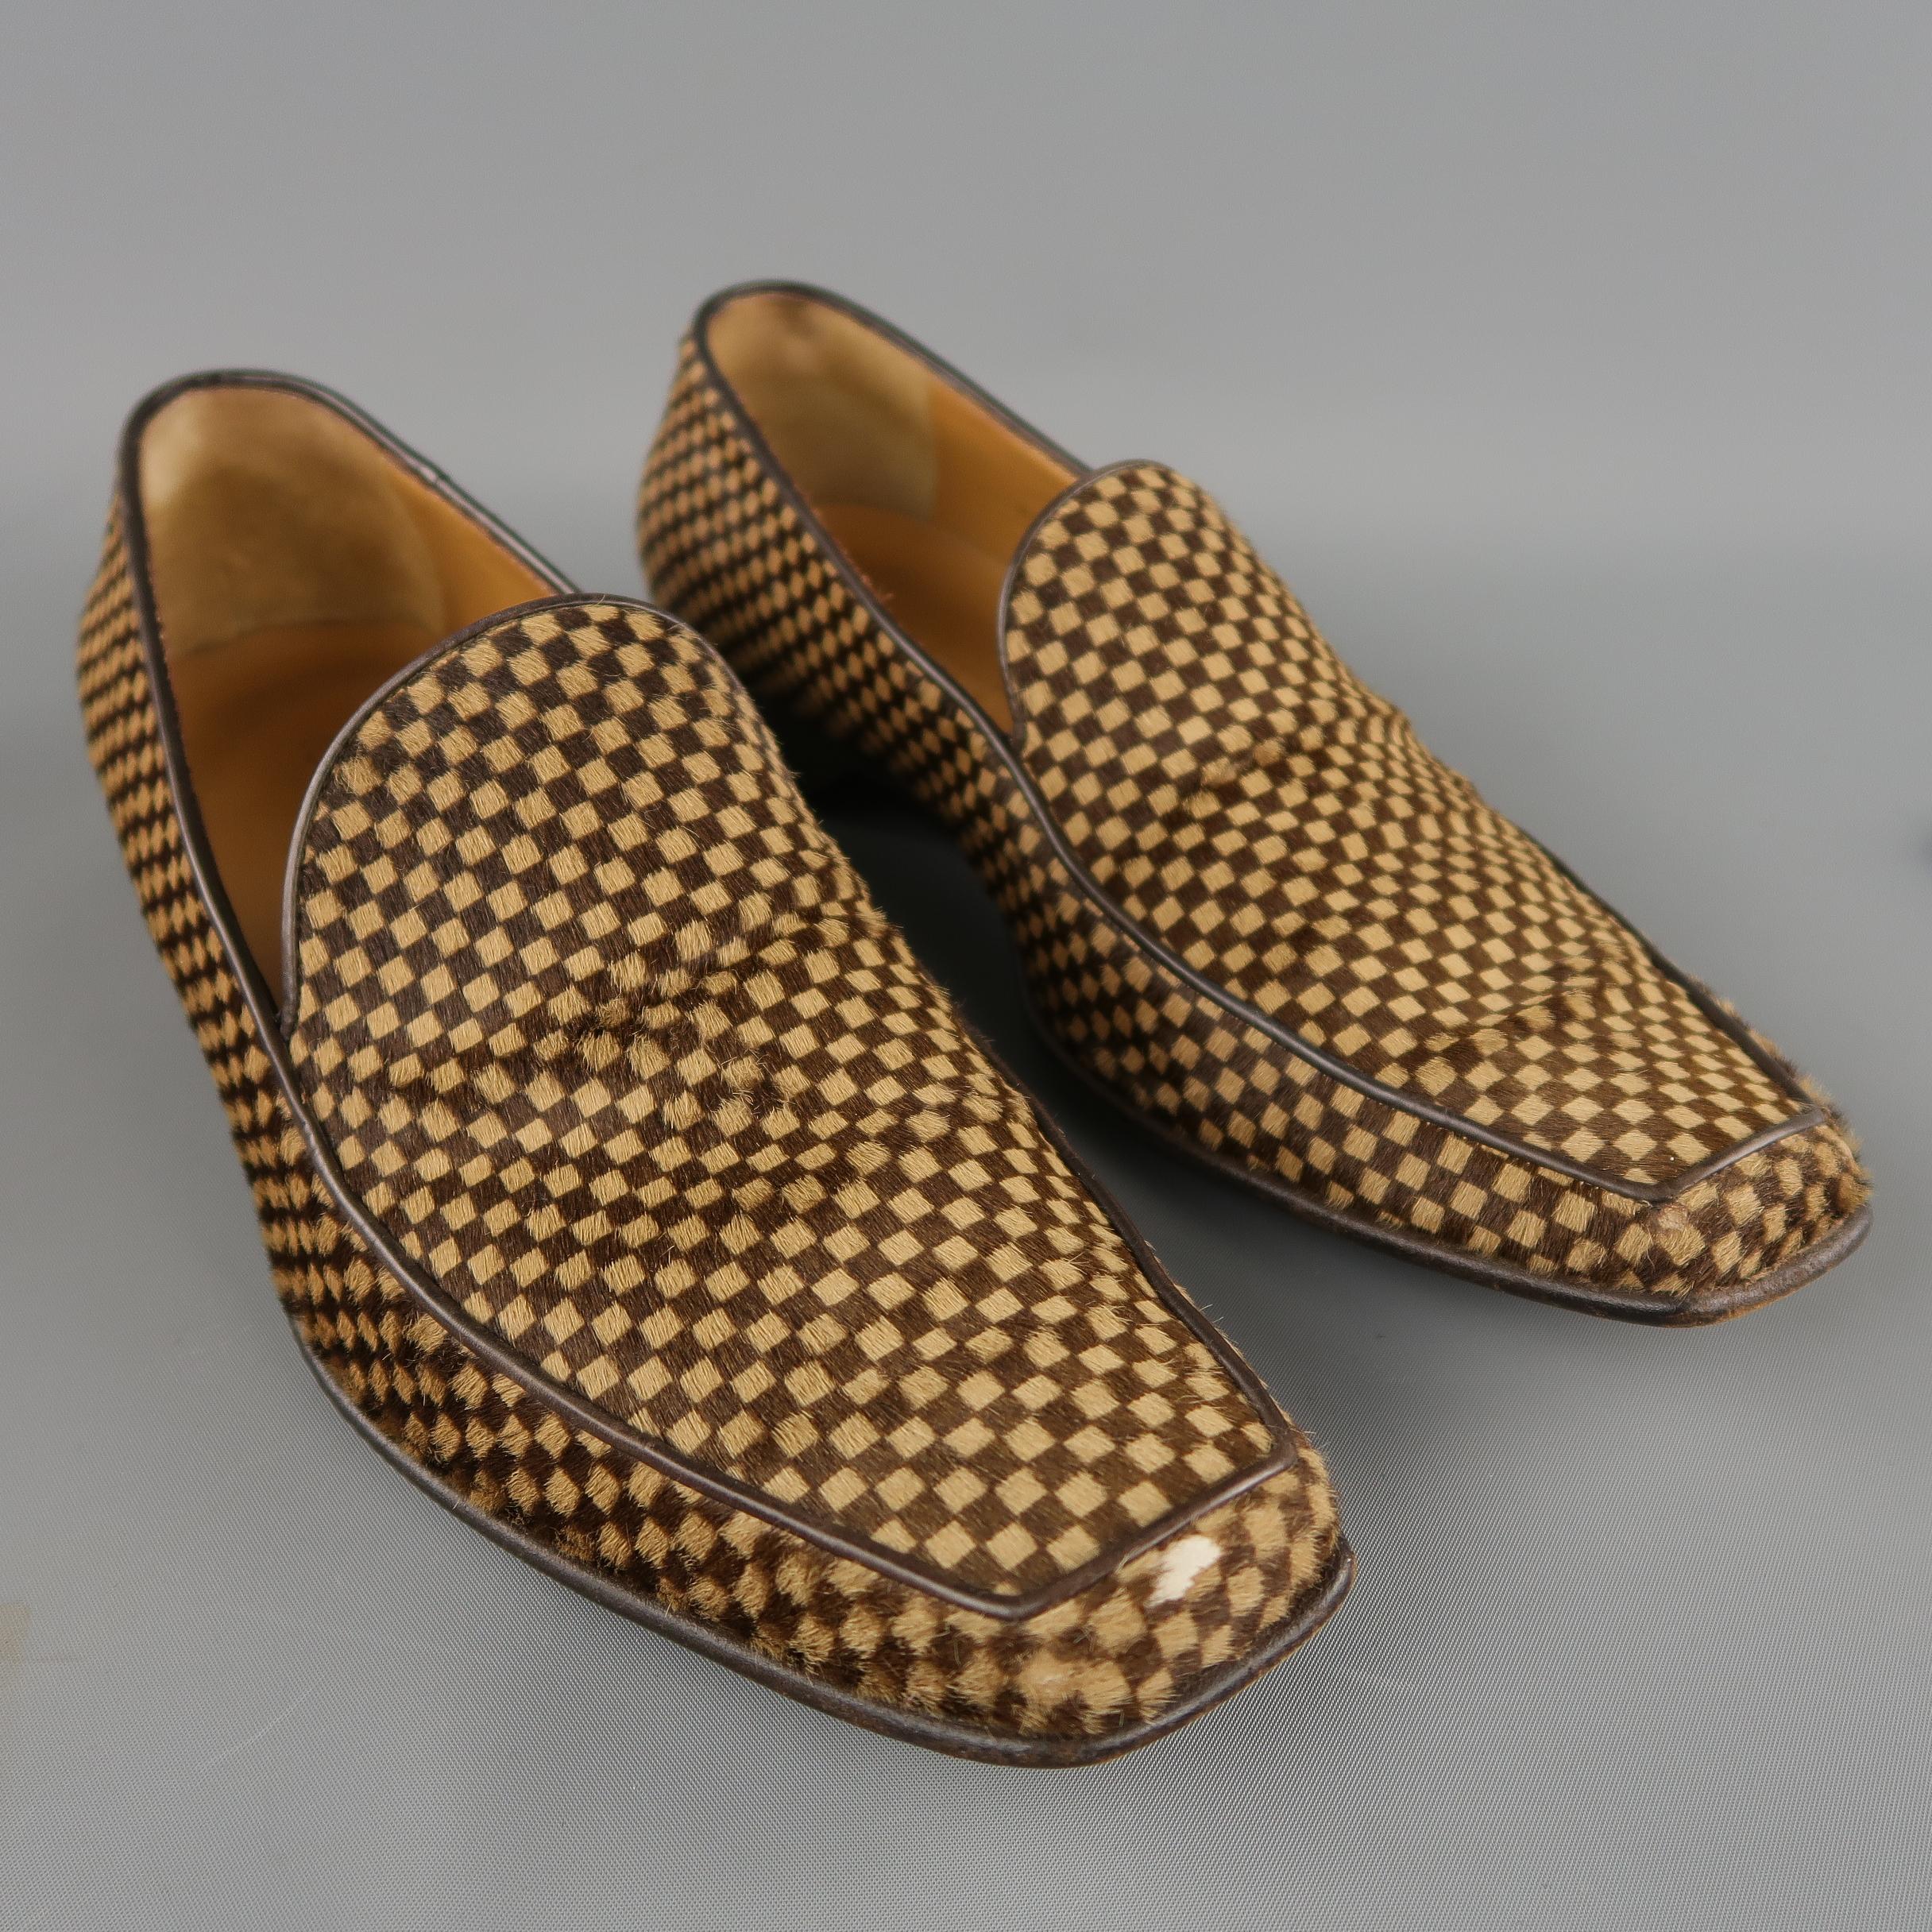 LOUIS VUITTON loafers come in brown and tan checkered Damier print ponyhair with a squared off point apron toe and brown leather piping. Scrufs on toes. As-is. Made in Italy.
 
Fair Pre-Owned Condition.
Marked: UK 10.5
 
Outsole: 12.5 x 4 in.